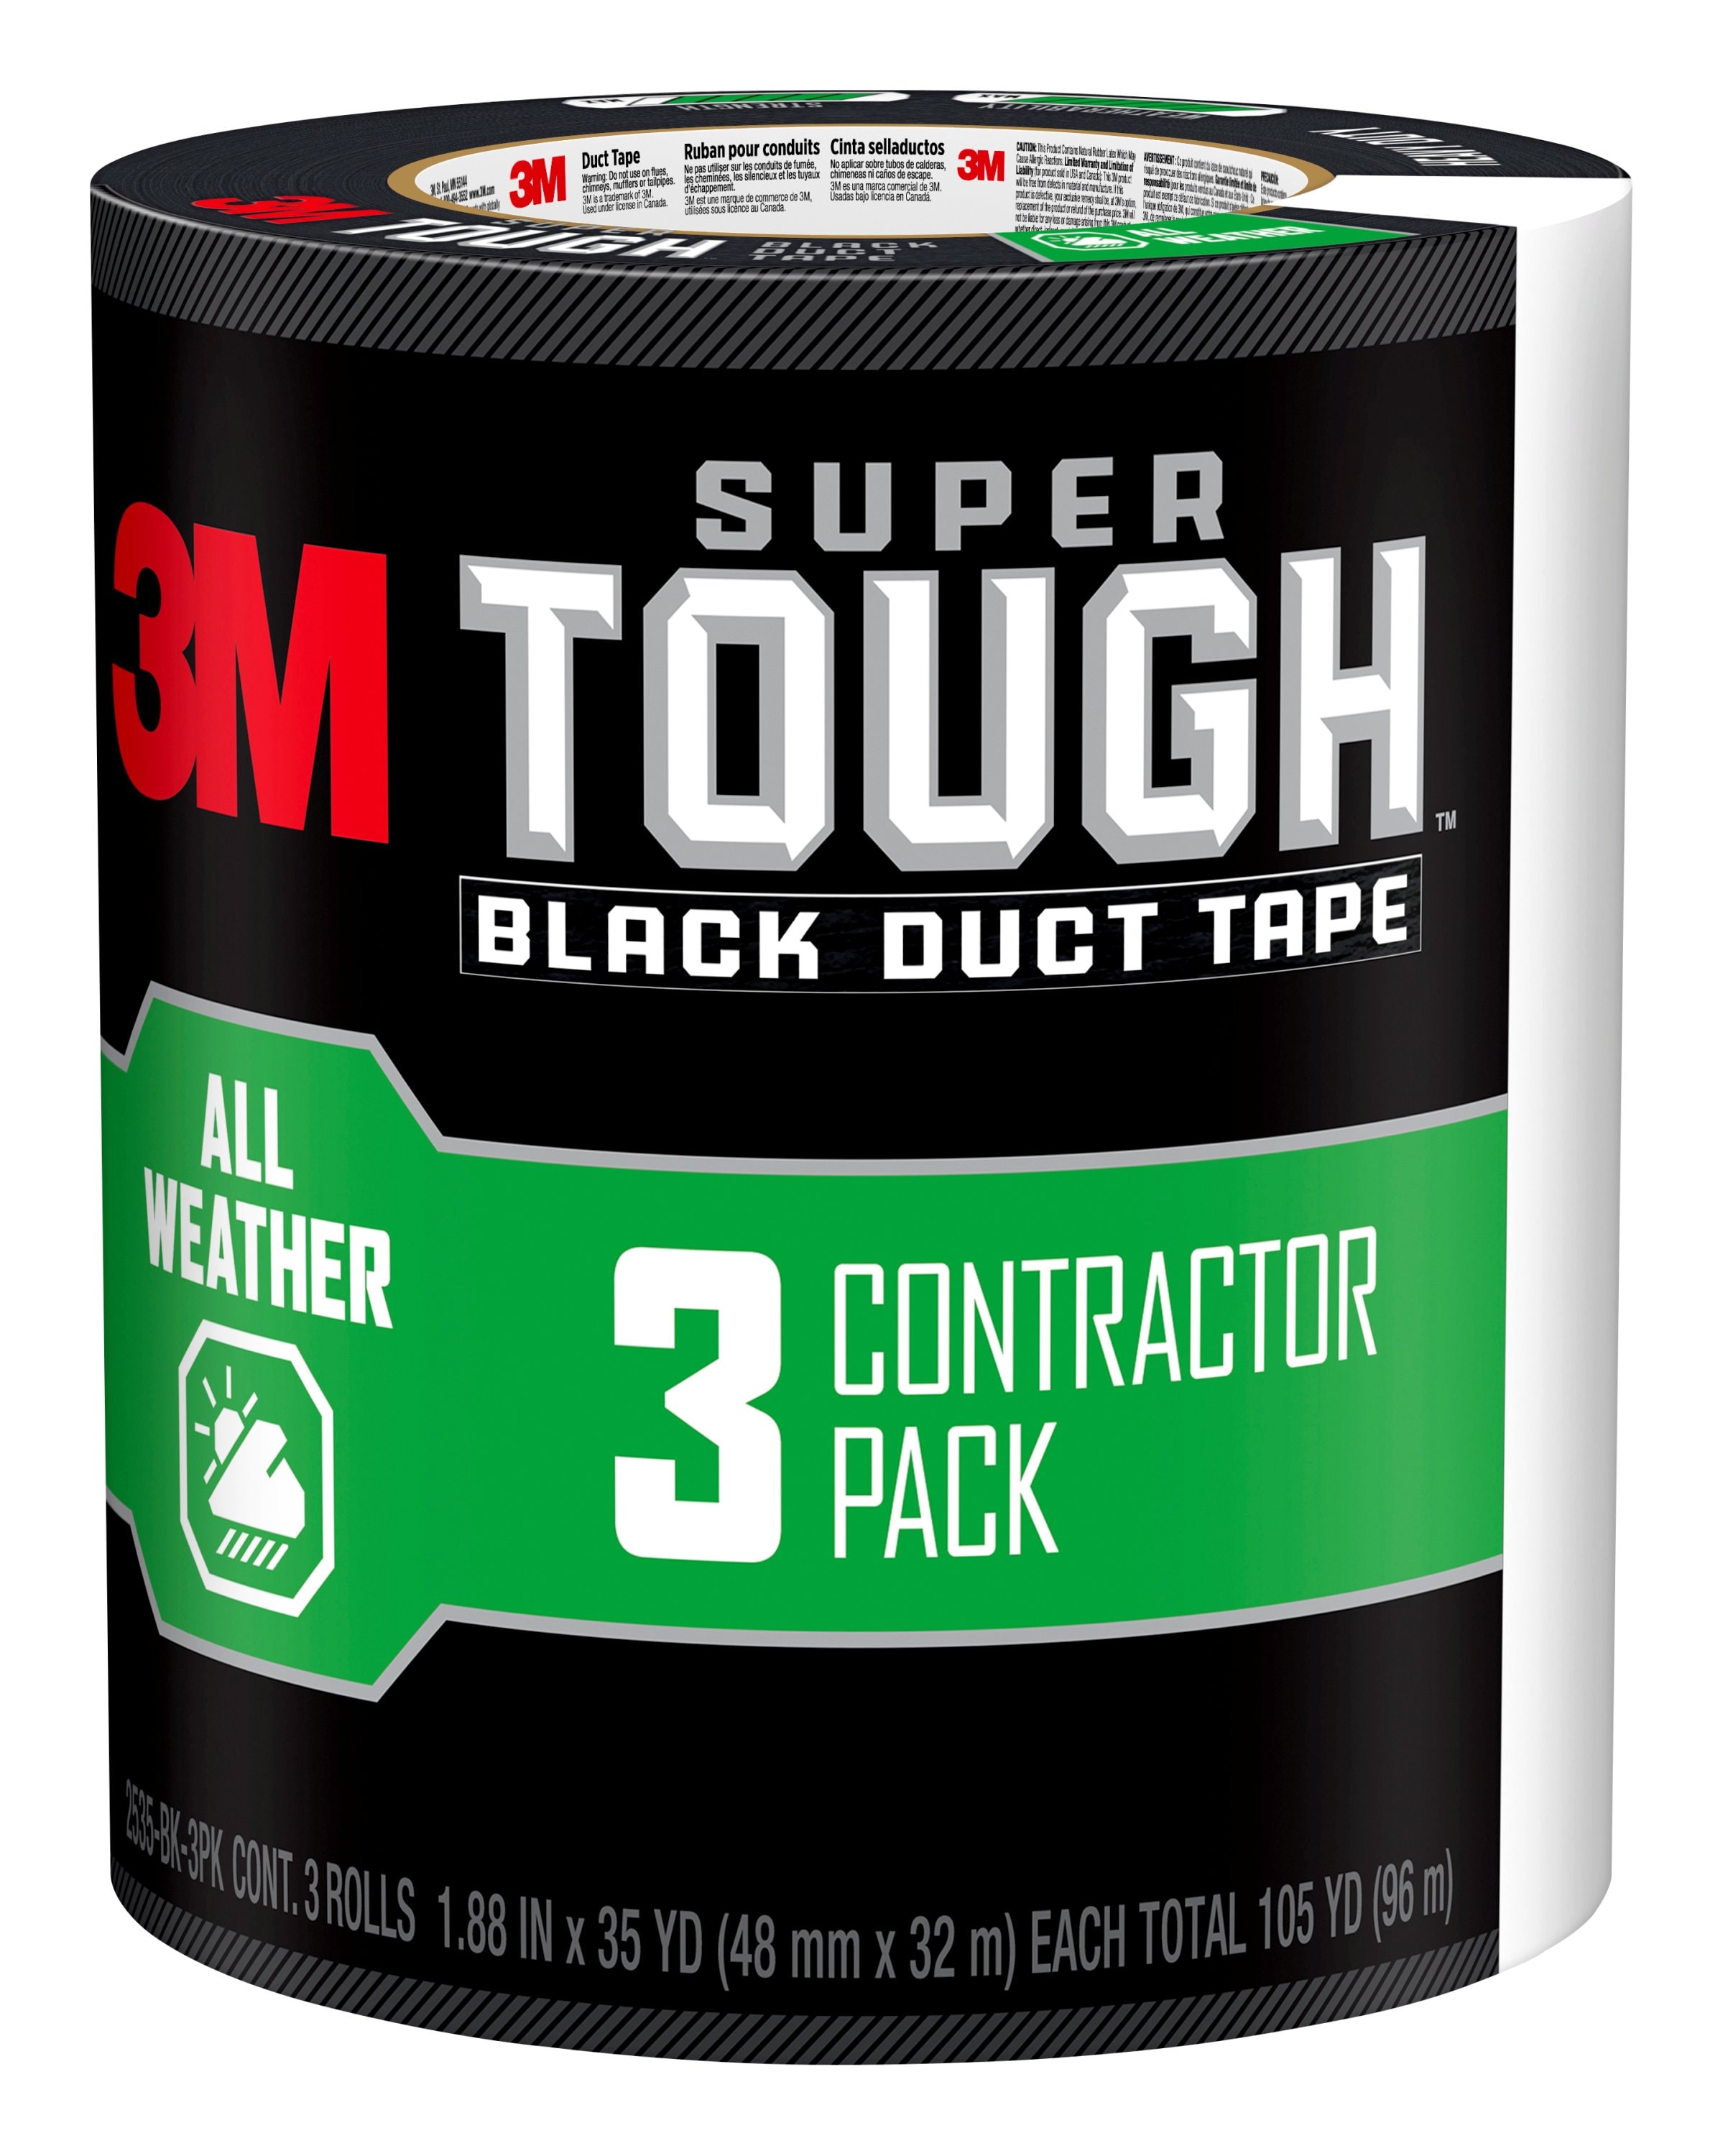 3M Color Duct Tape, 1.88 in. x 20 yd.:Facility Safety and Maintenance:Tapes